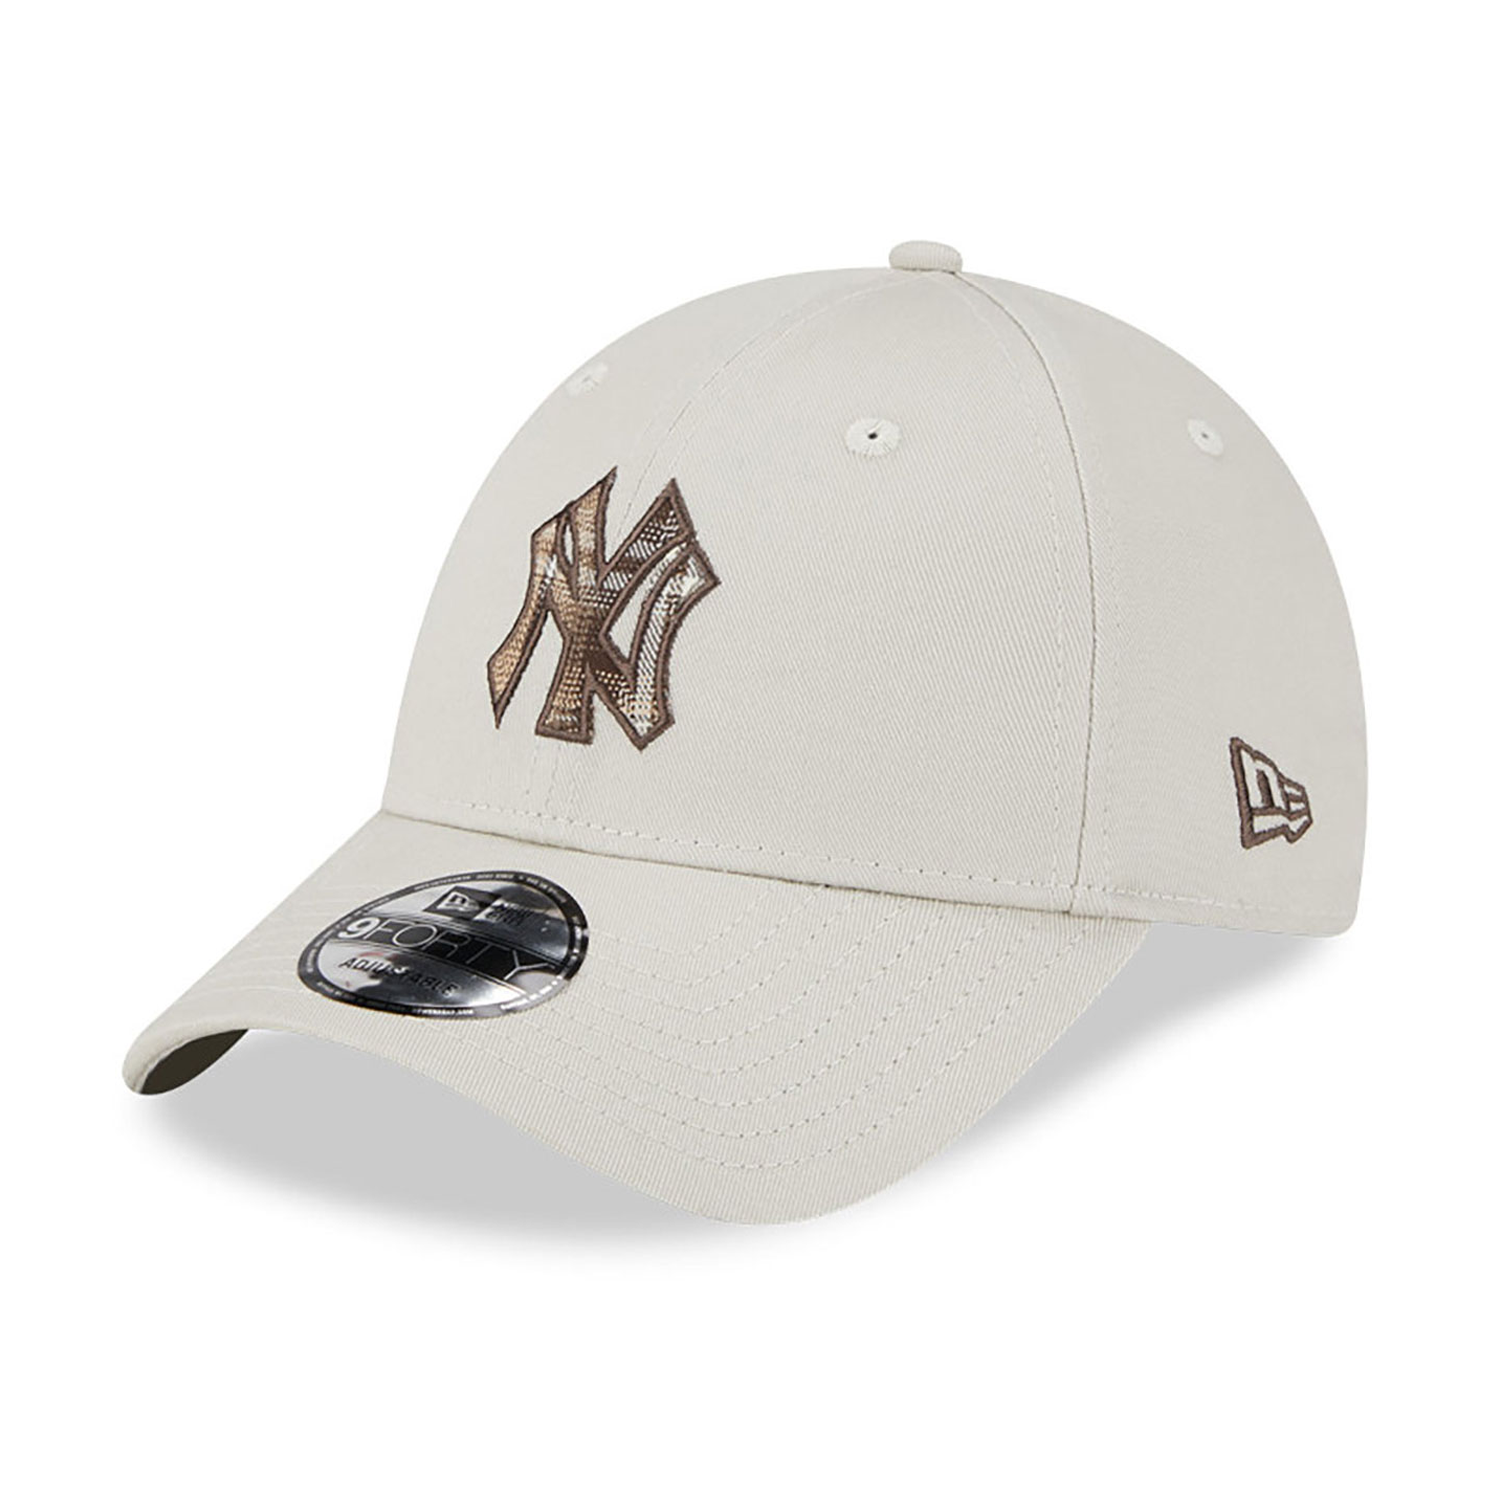 New York Yankees New Era Cap 9FORTY "Check Infill" STNBLK